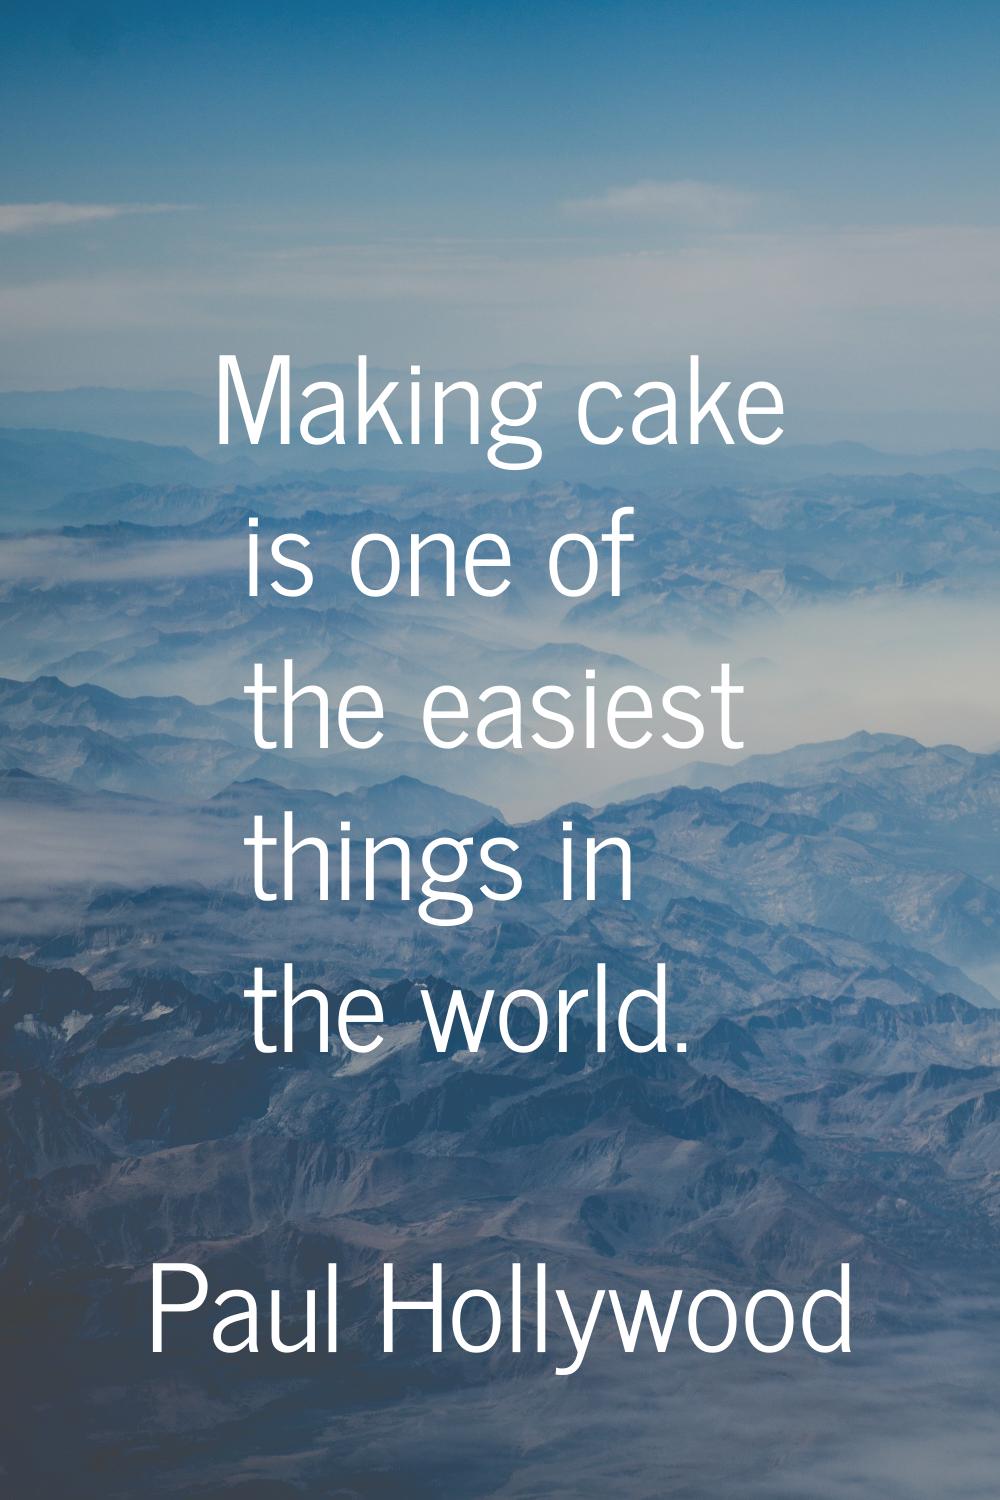 Making cake is one of the easiest things in the world.